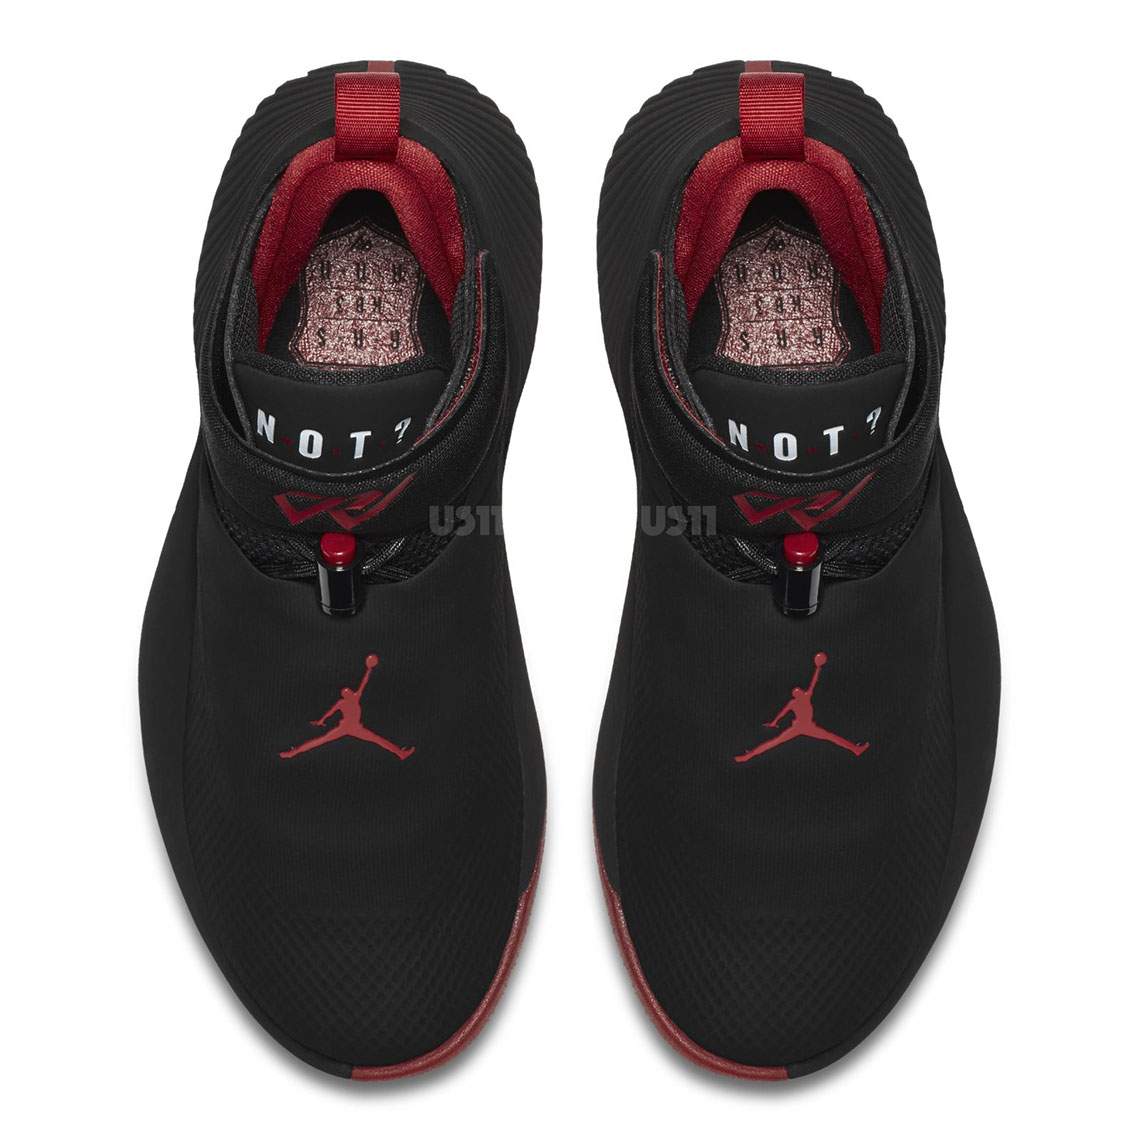 Jordan Fly Next Russell Westbrook Why Not Black Red 4